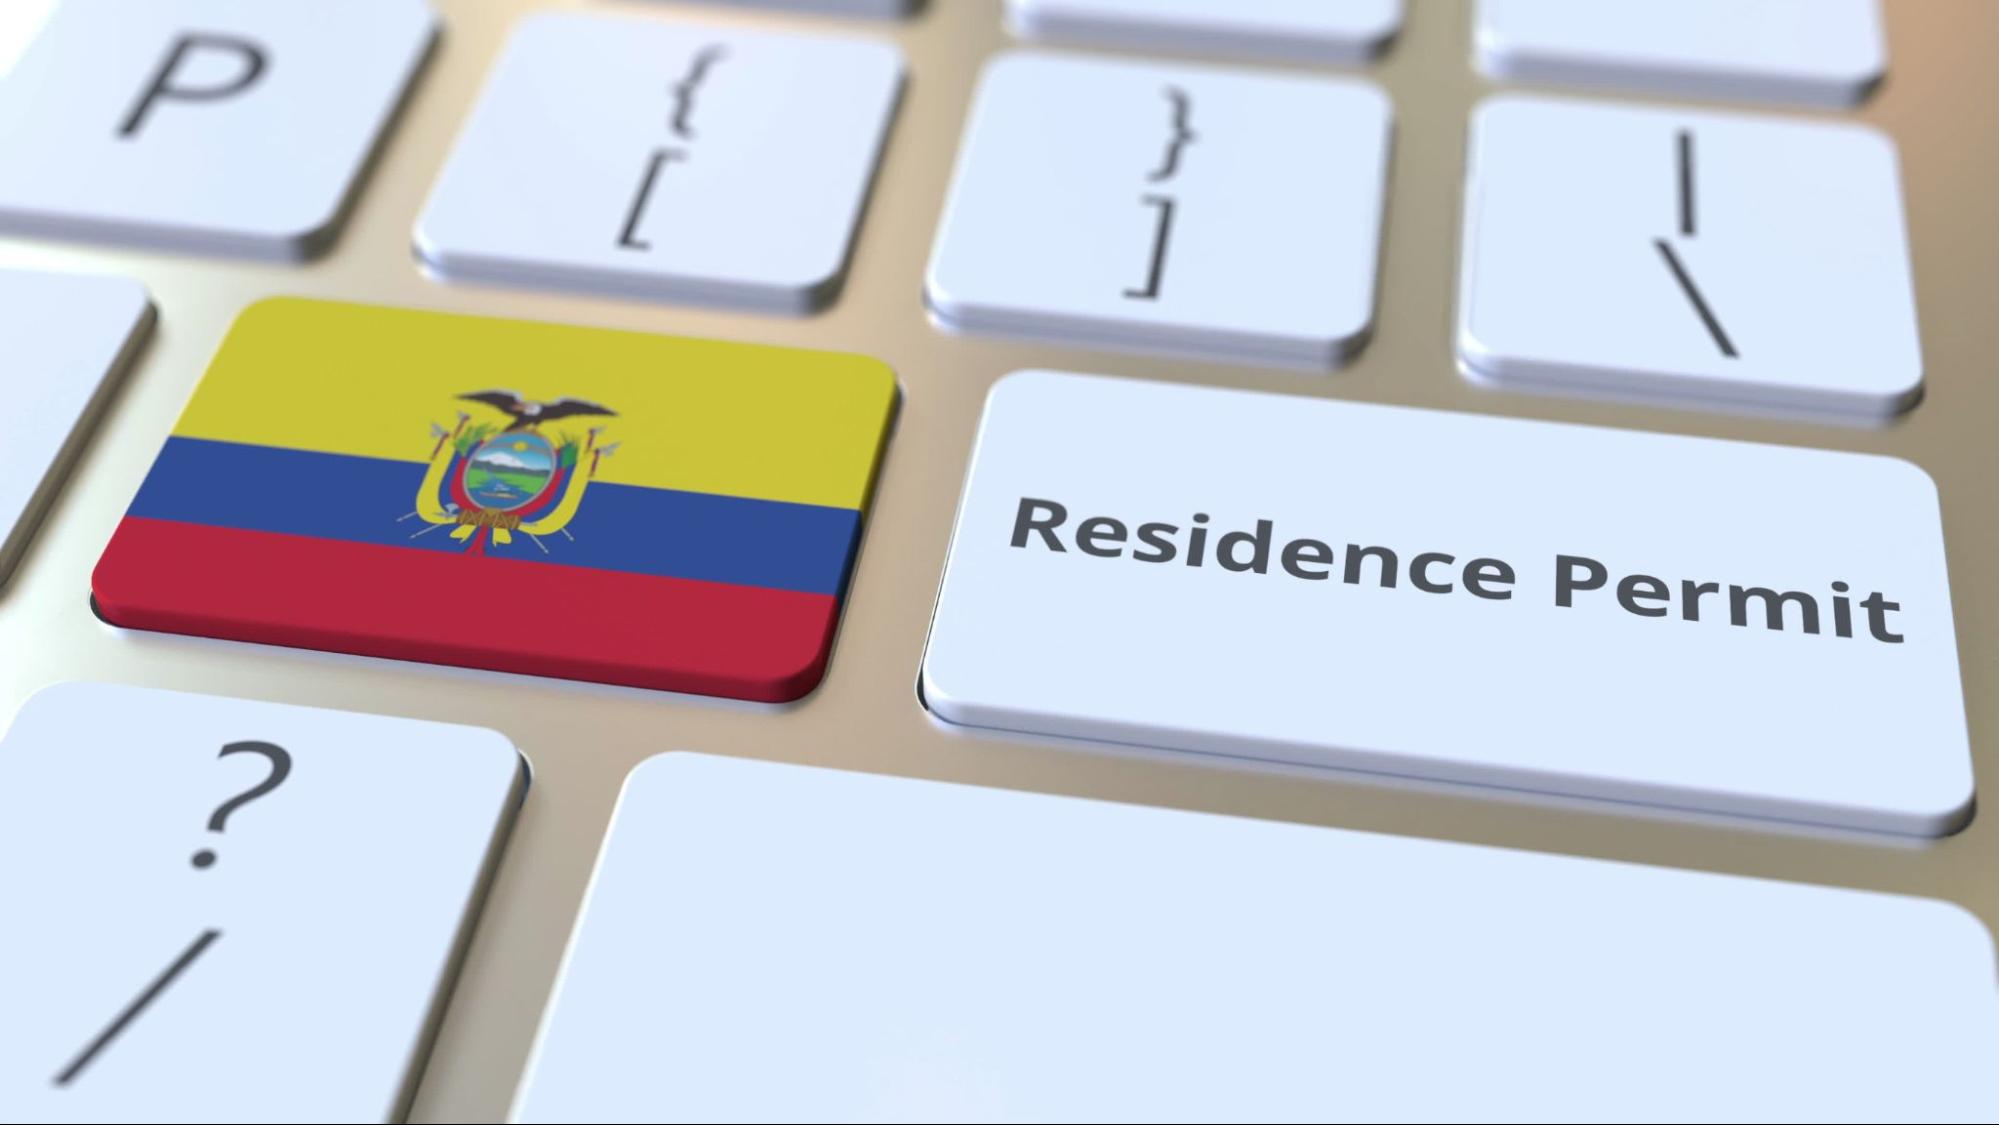 Residence Permit text and flag of Ecuador